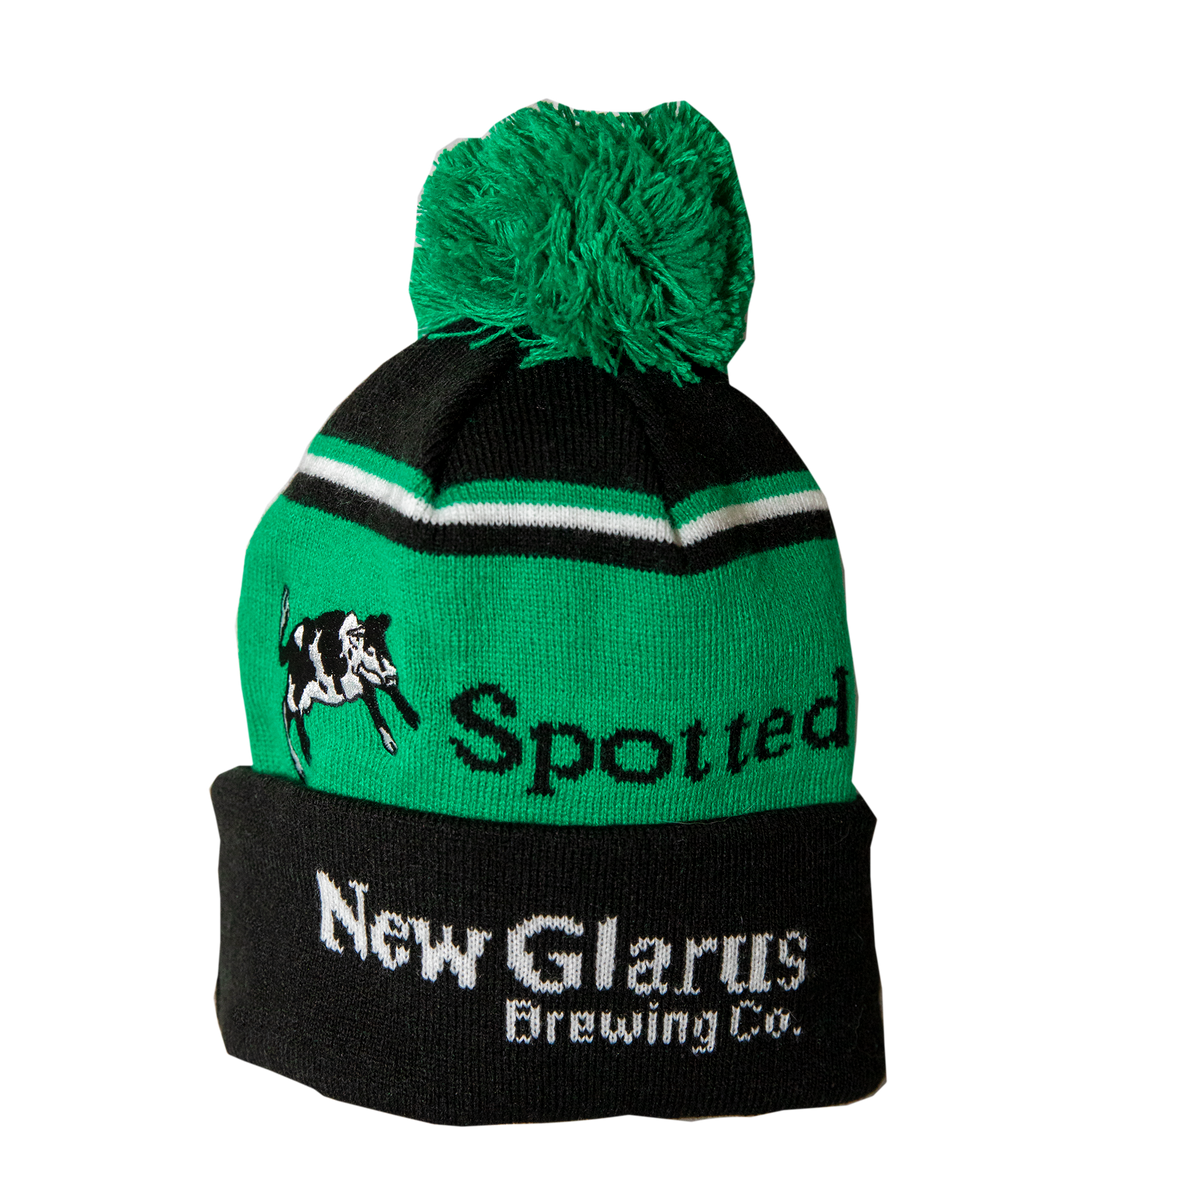 Green and black stocking hat with Spotted Cow and New Glarus Brewing Co. on it with a large green pom pom on top